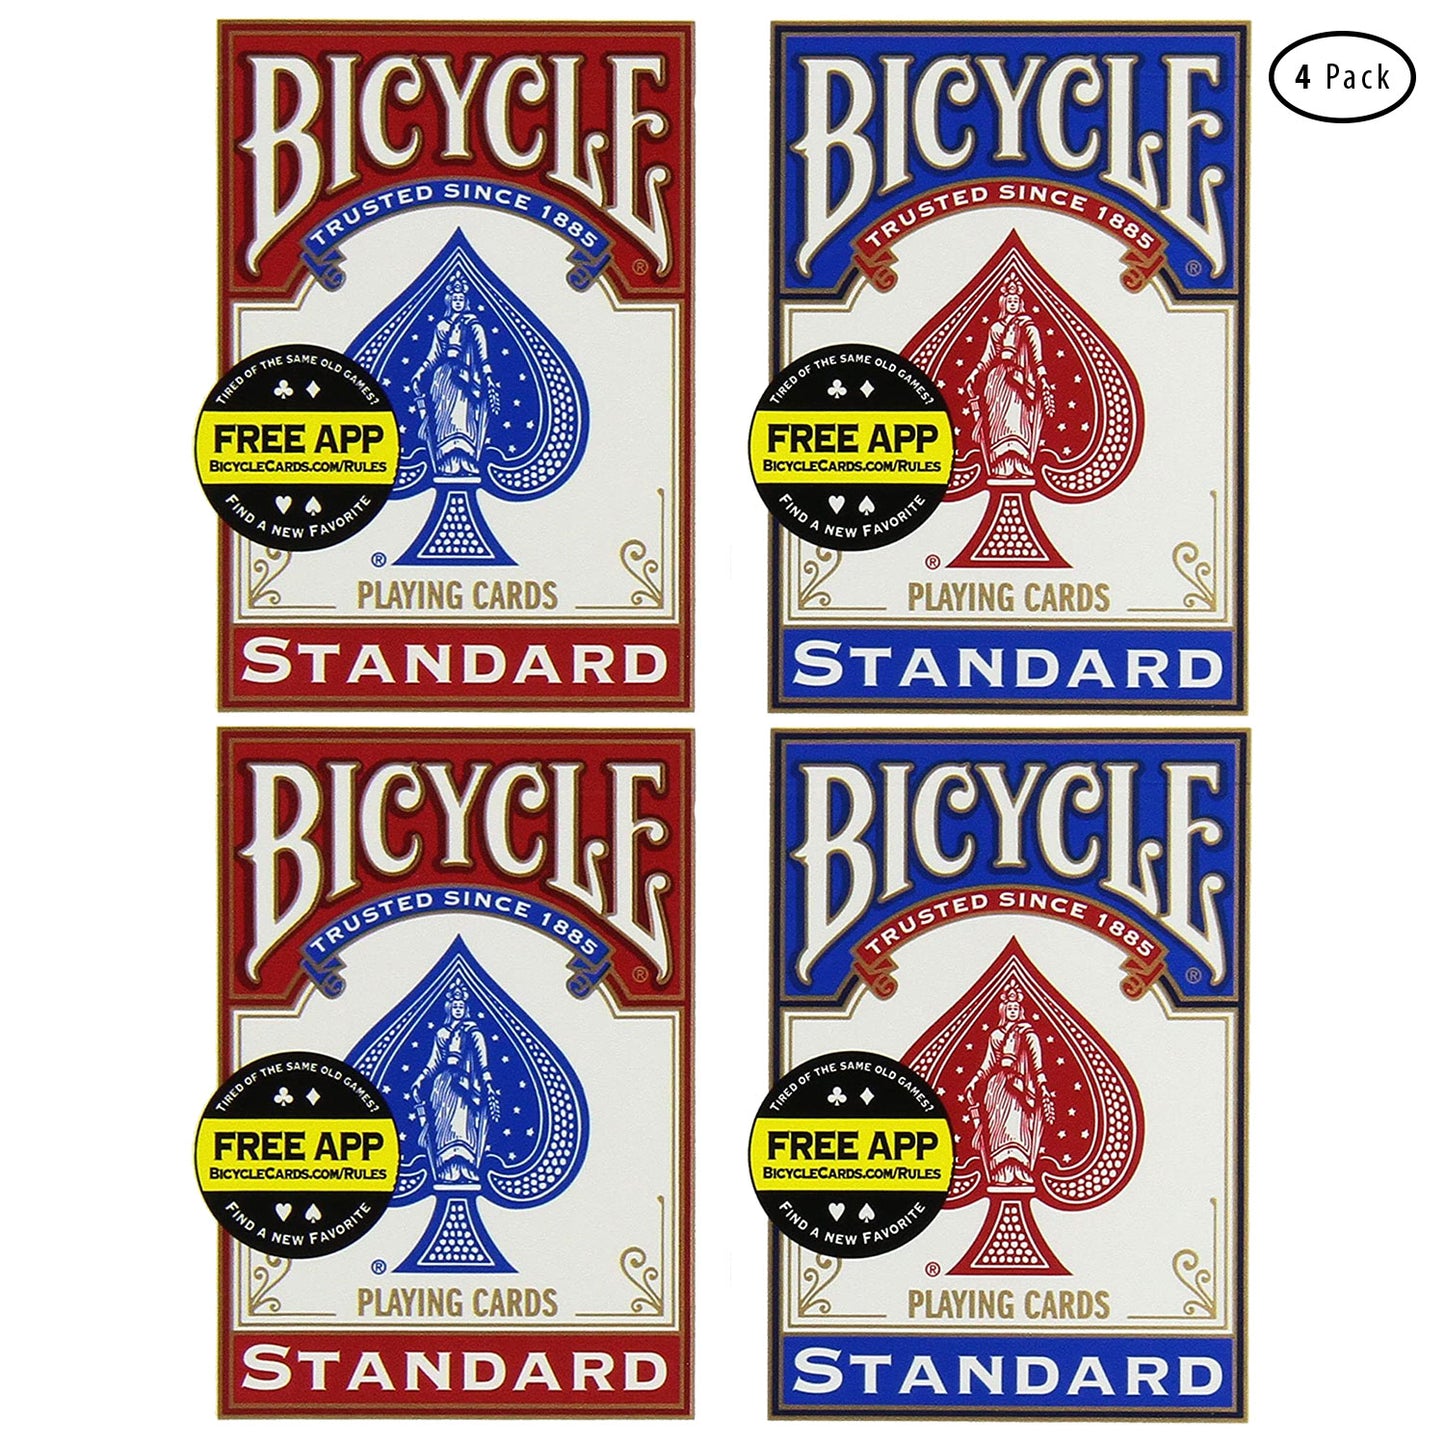 Bicycle Poker Size Standard Index Playing Cards (4-Pack) [Colors May Vary: Red, Blue]